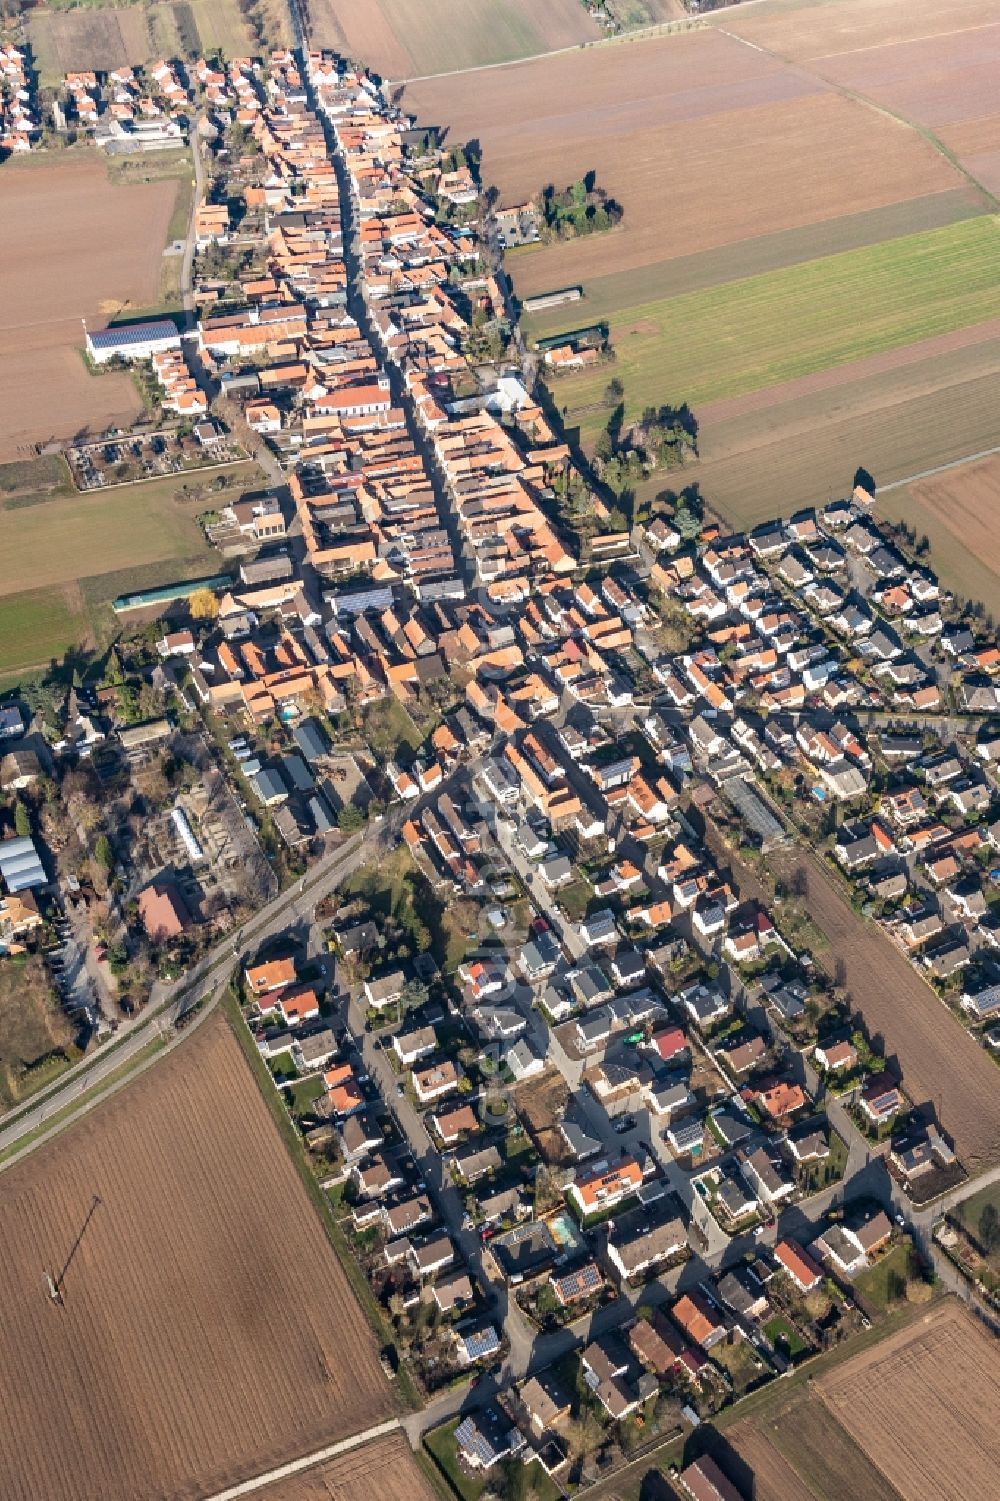 Herxheim bei Landau (Pfalz) from above - Village - view on the edge of agricultural fields and farmland in the district Hayna in Herxheim bei Landau (Pfalz) in the state Rhineland-Palatinate, Germany